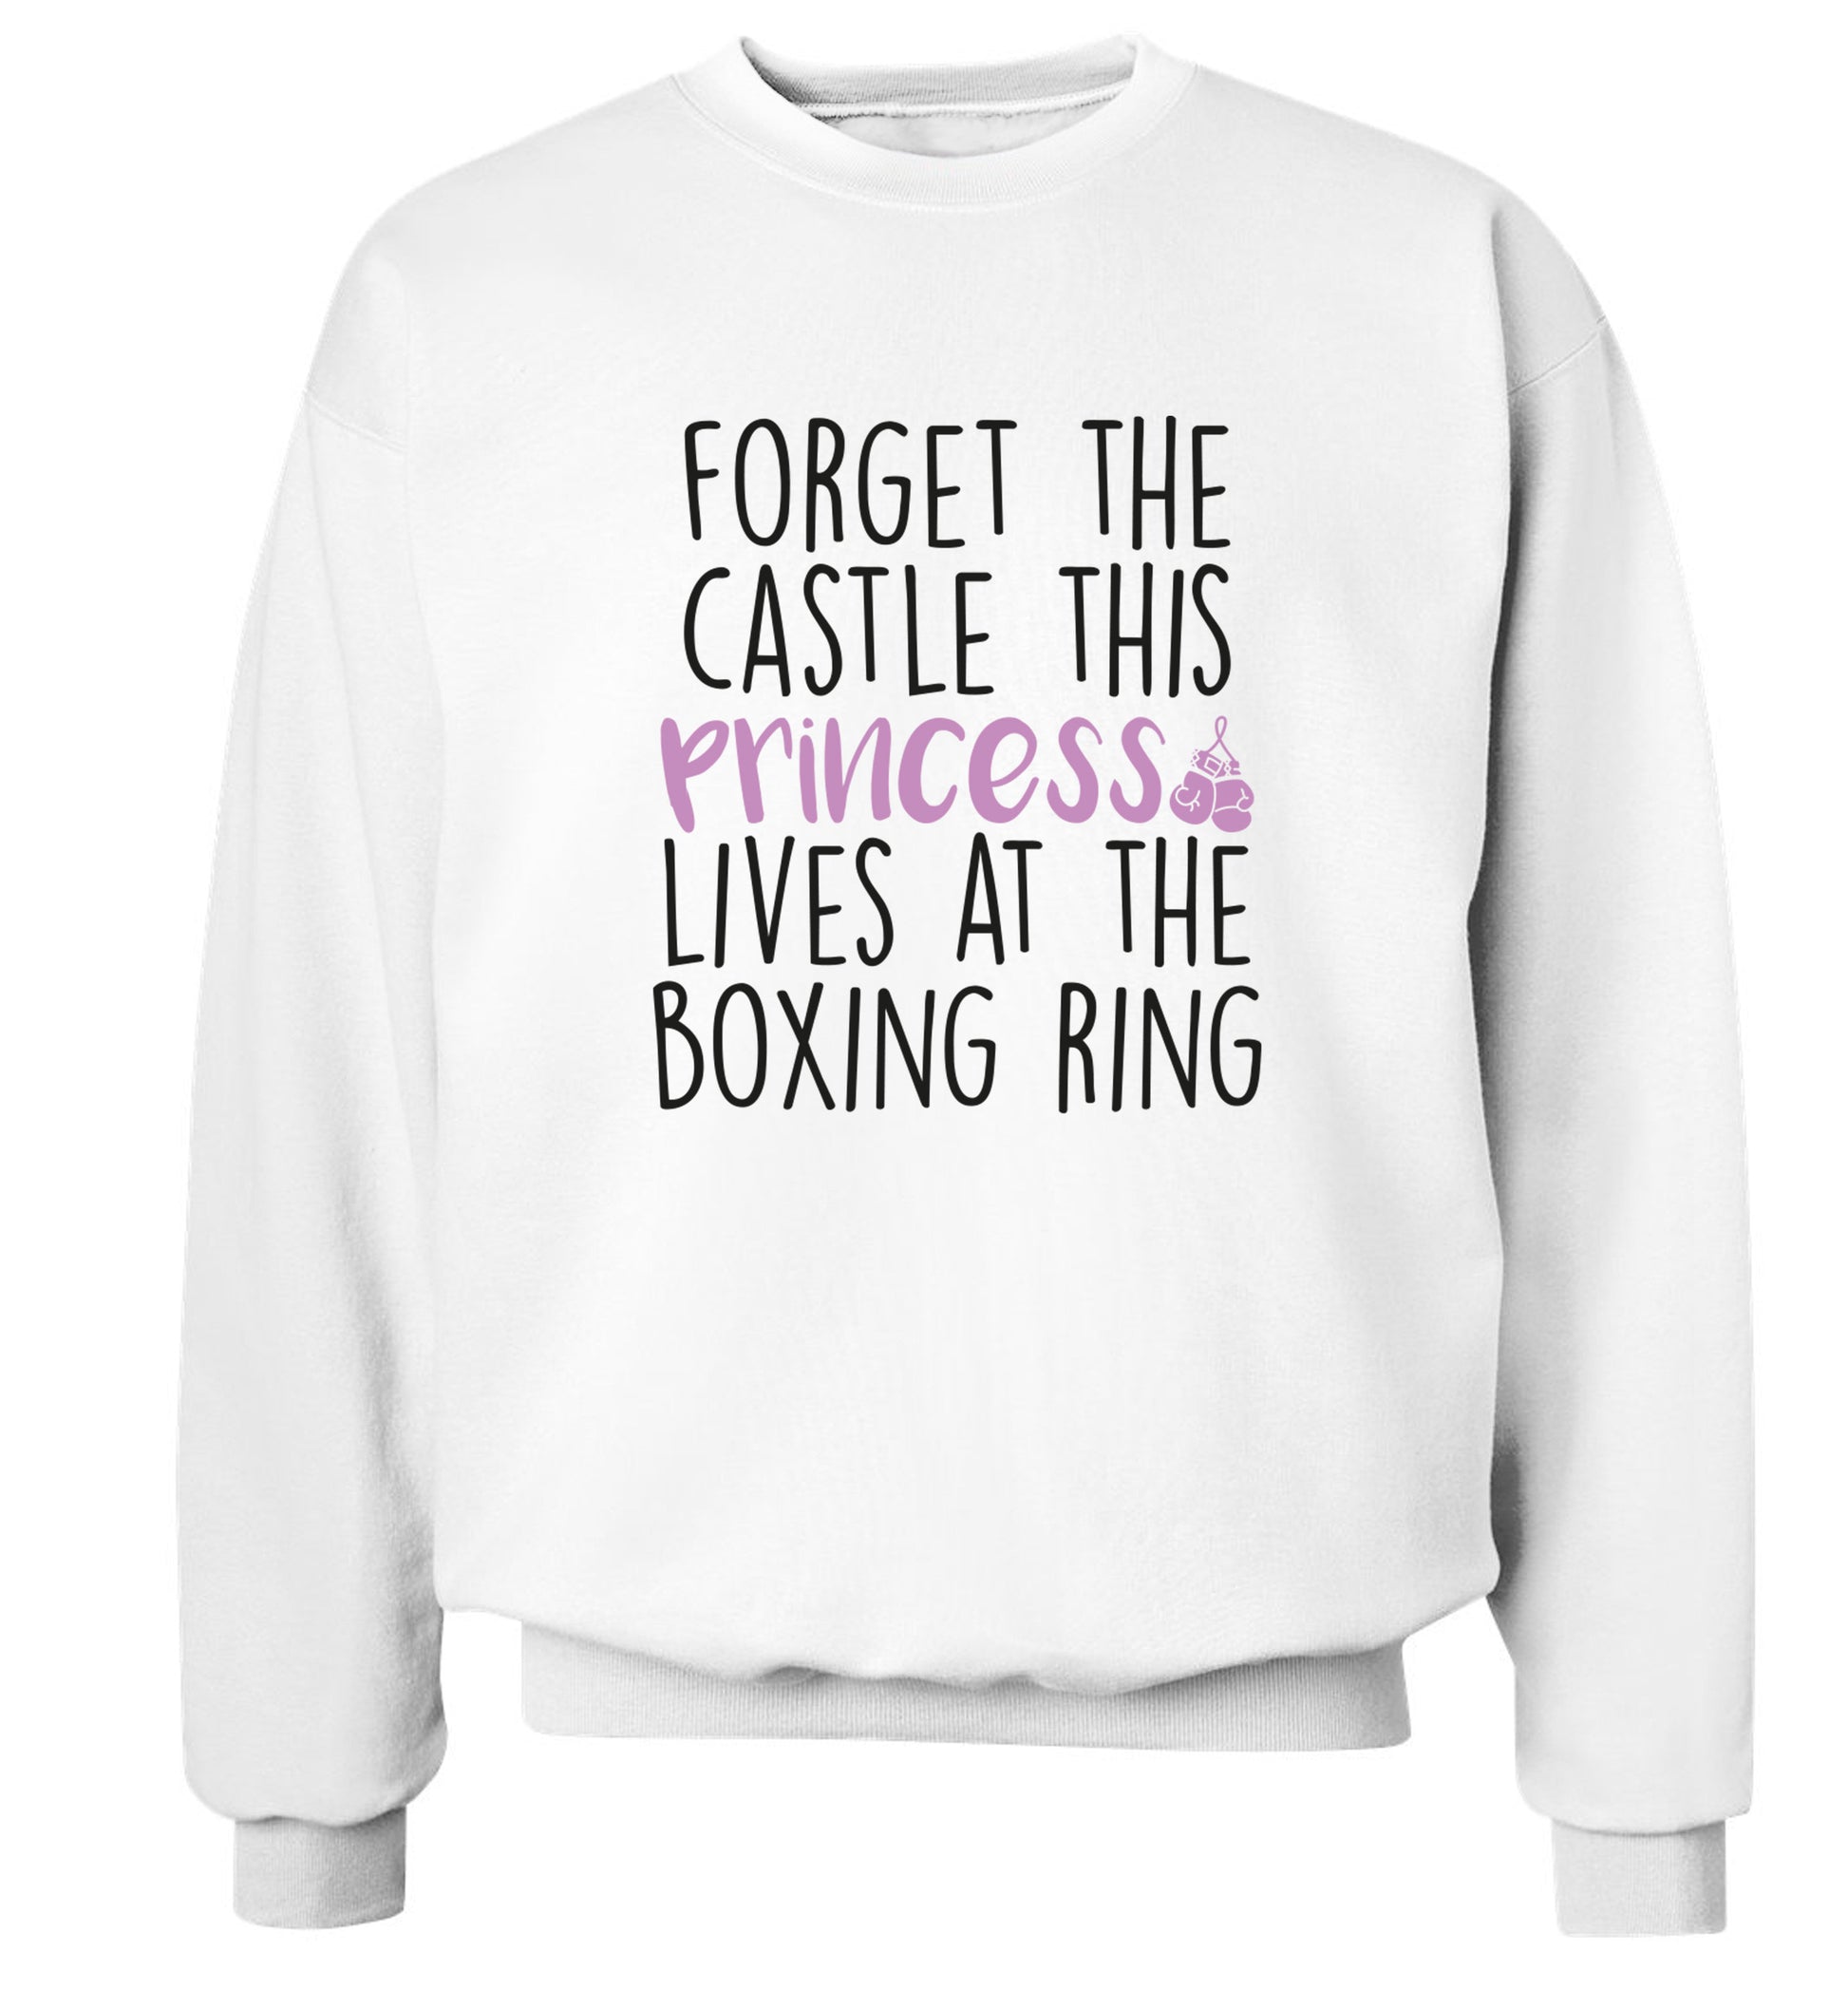 Forget the castle this princess lives at the boxing ring Adult's unisex white Sweater 2XL